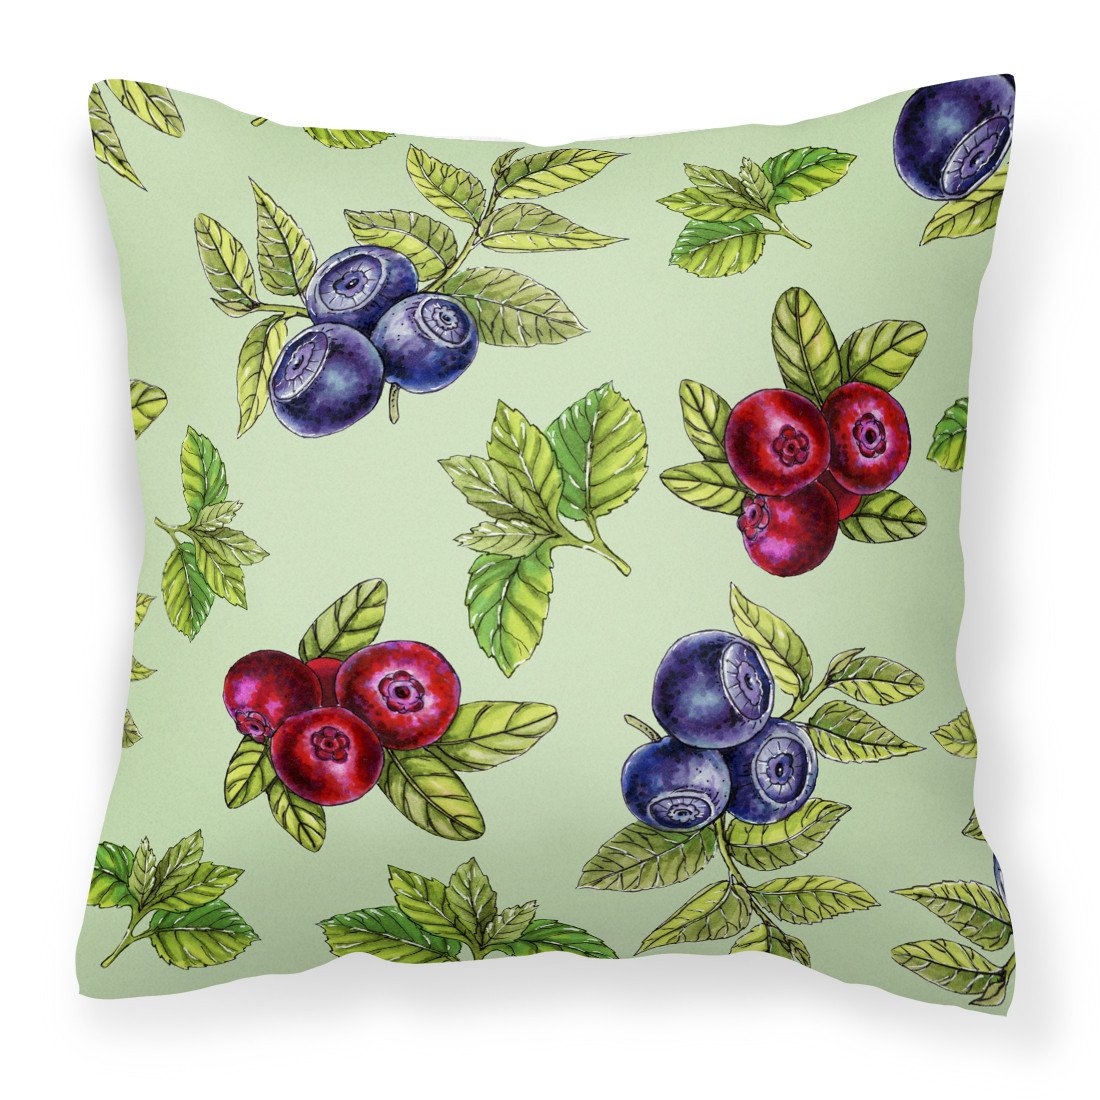 Berries in Green Fabric Decorative Pillow BB5208PW1818 by Caroline's Treasures